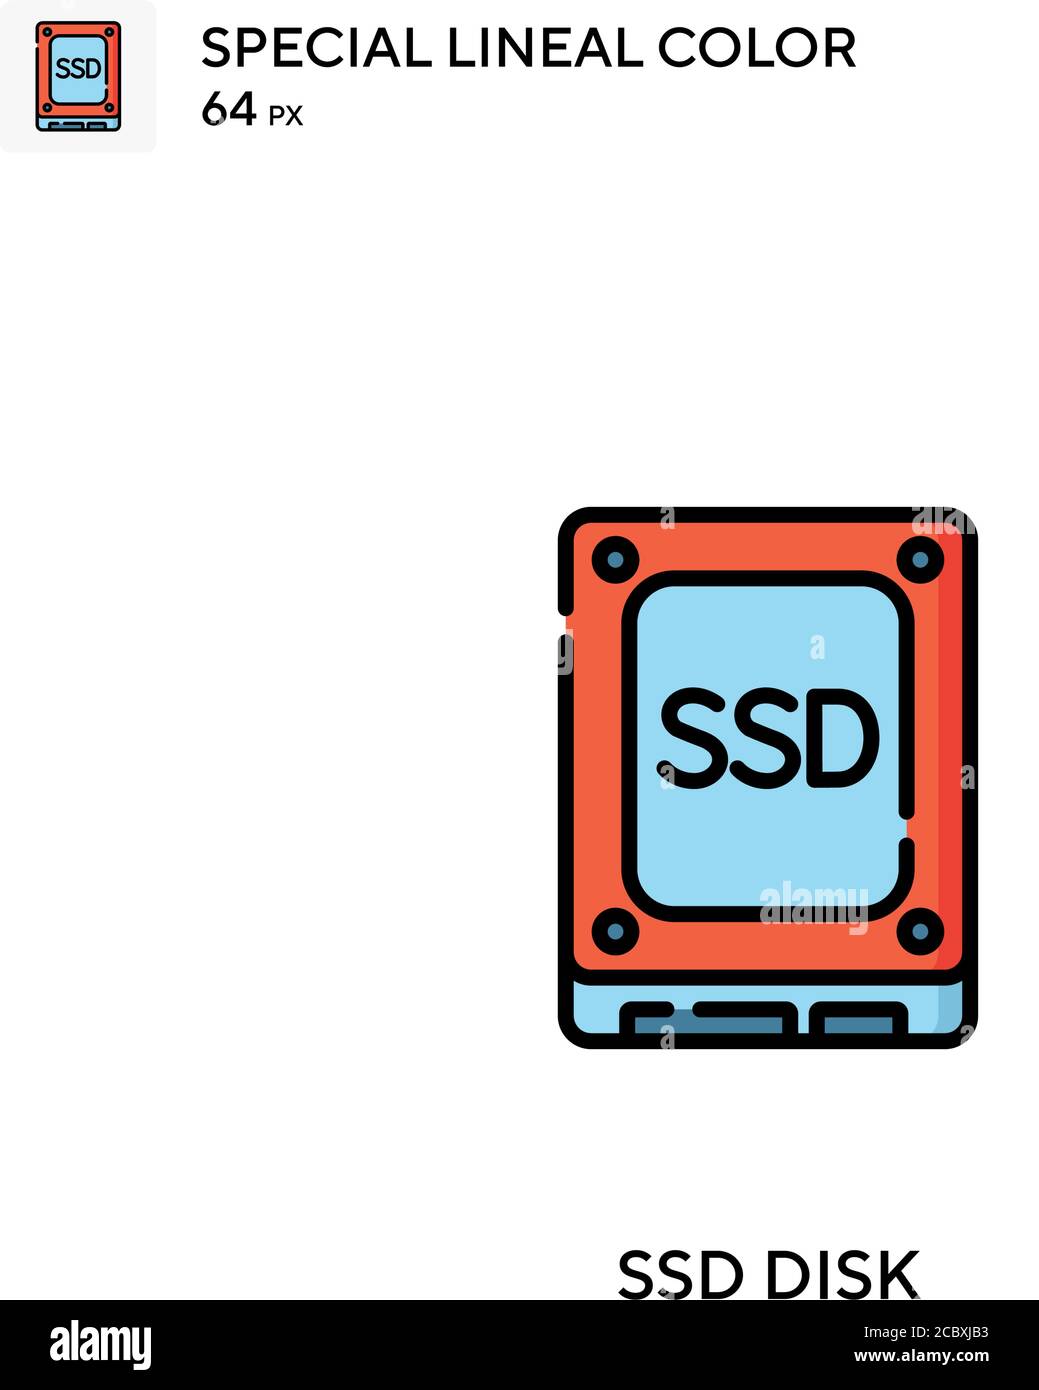 Ssd disk Special lineal color vector icon. Ssd disk icons for your business project Stock Vector